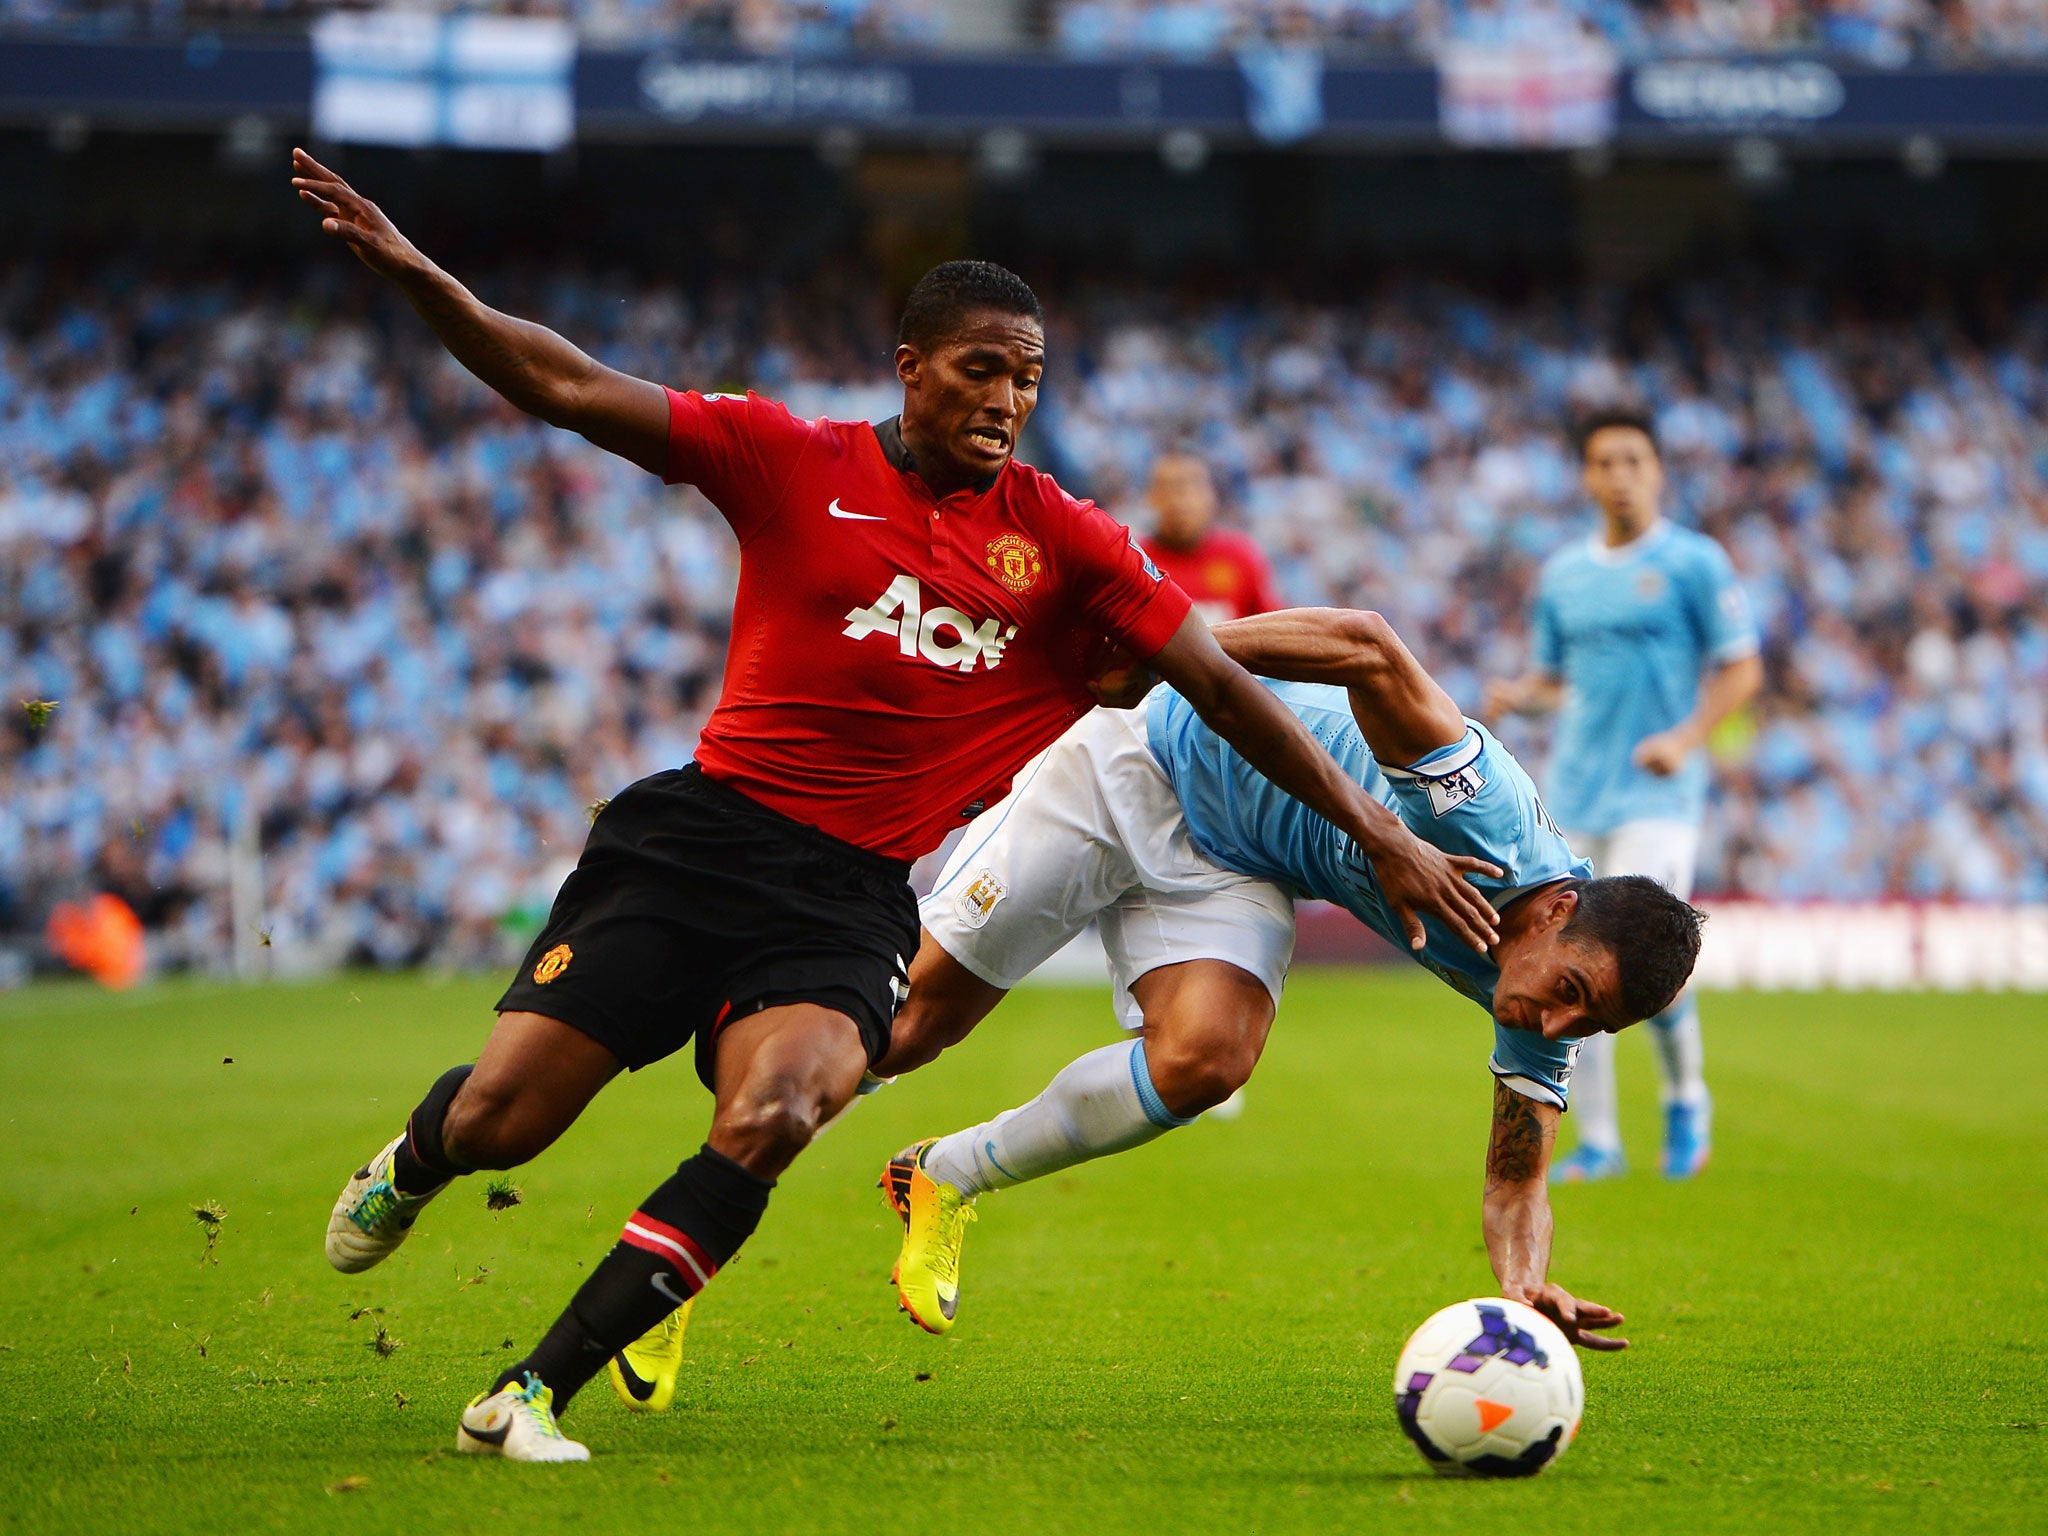 Antonio Valencia could be on his way out of Old Trafford with Roberto Mancini interested in bringing him to Galatasaray